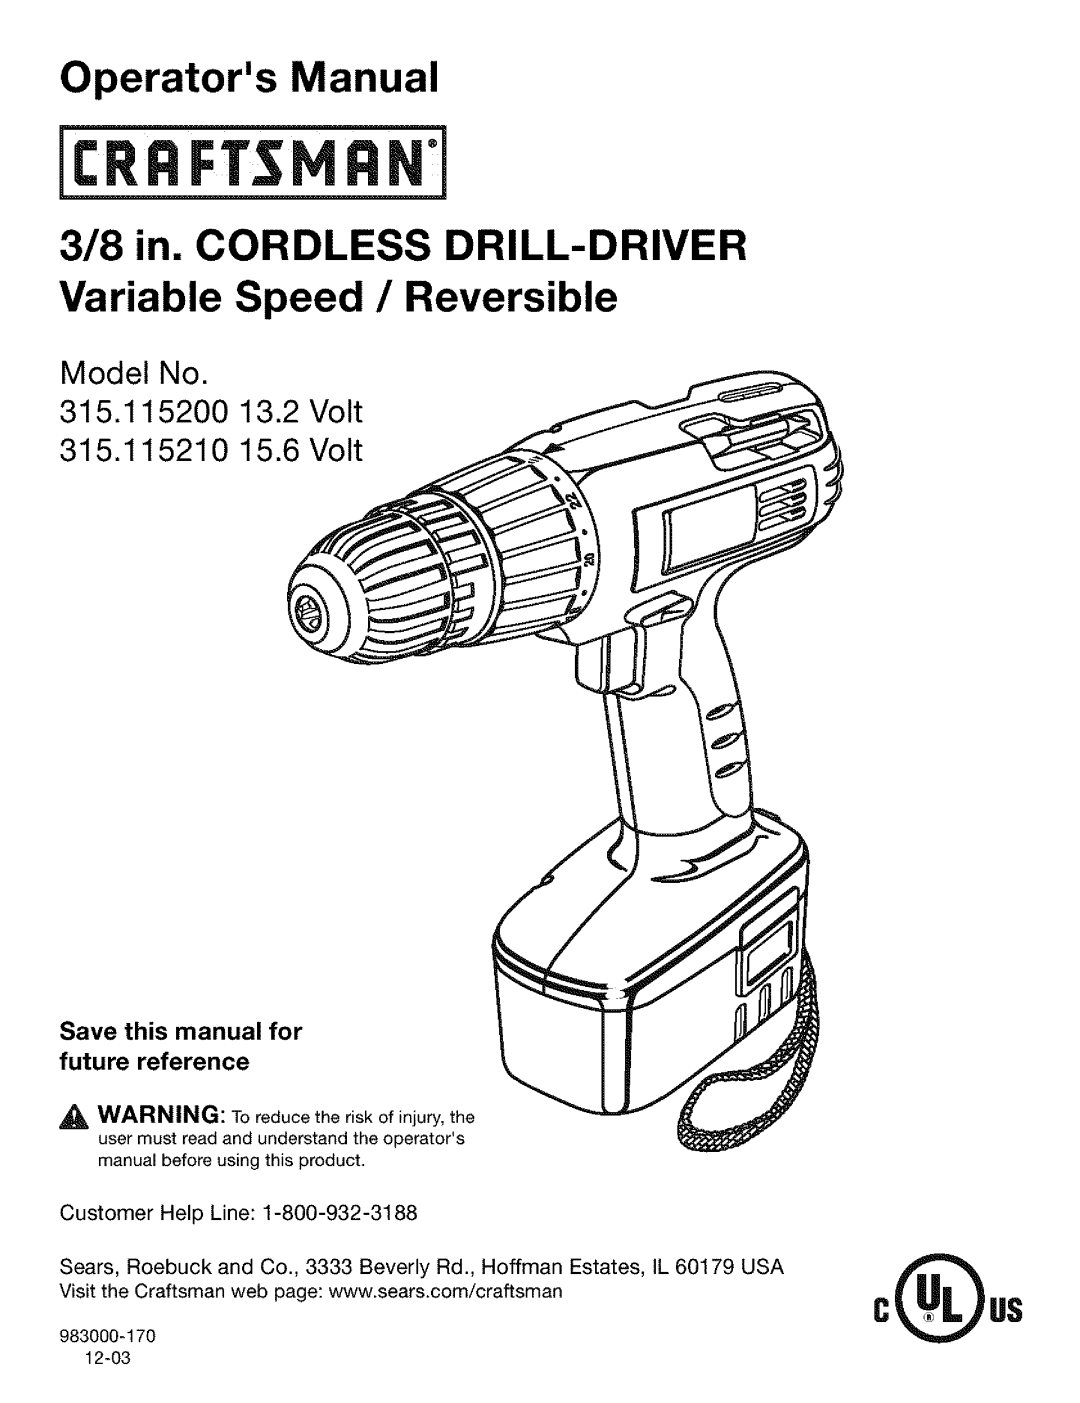 Craftsman 315.11521 manual Save this manual for future reference, Operators Manual 3/8 in. CORDLESS DRILL-DRIVER 